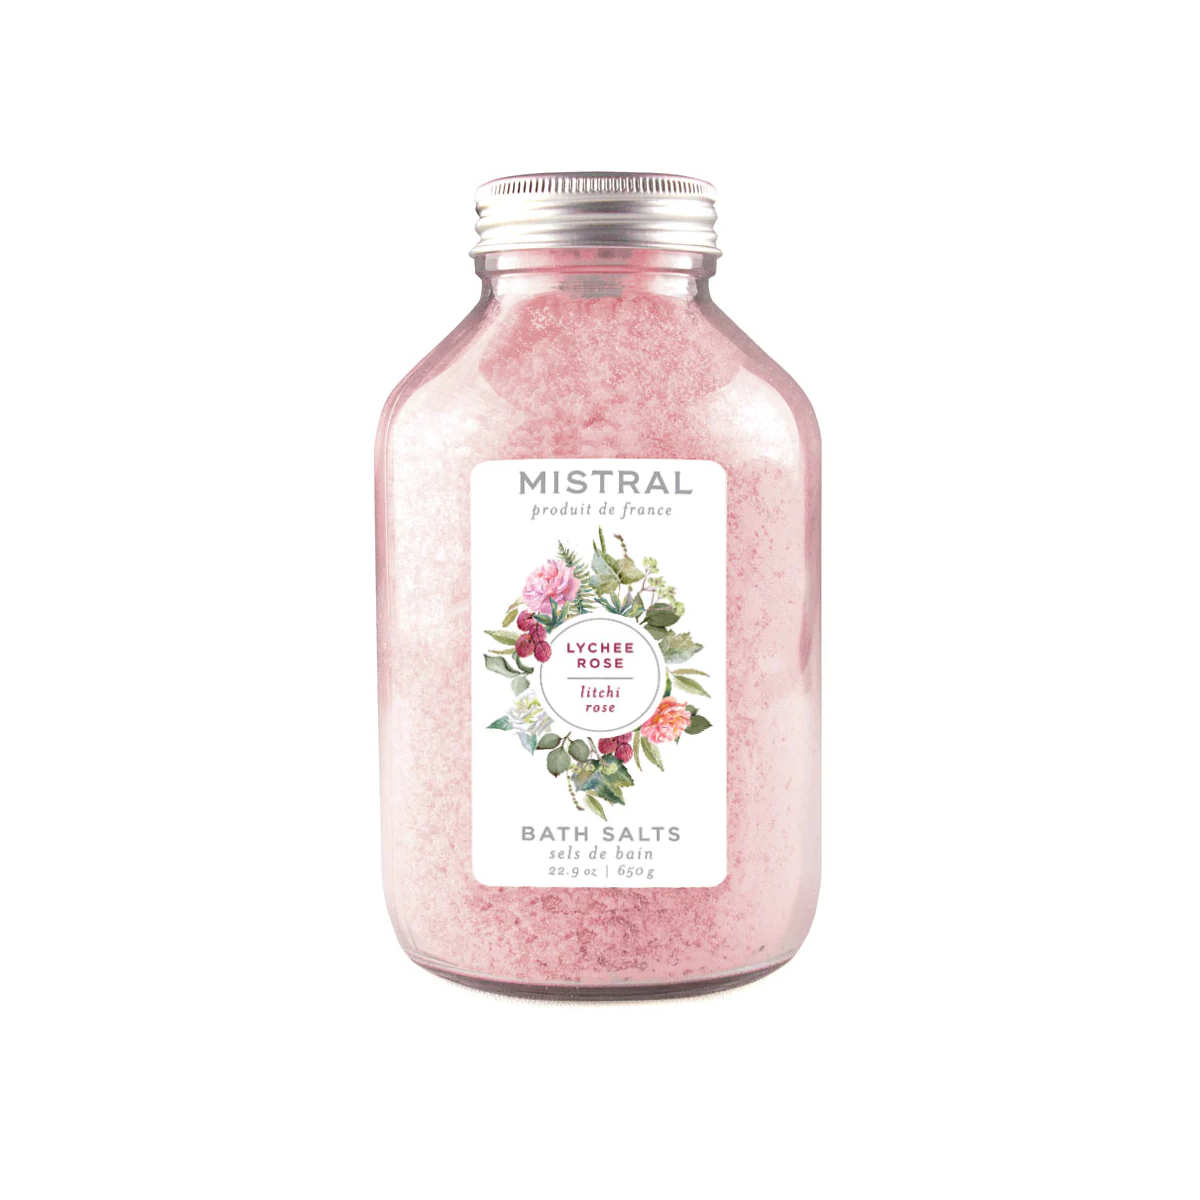 LYCHEE ROSE CLASSIC BATH SALTS by MISTRAL